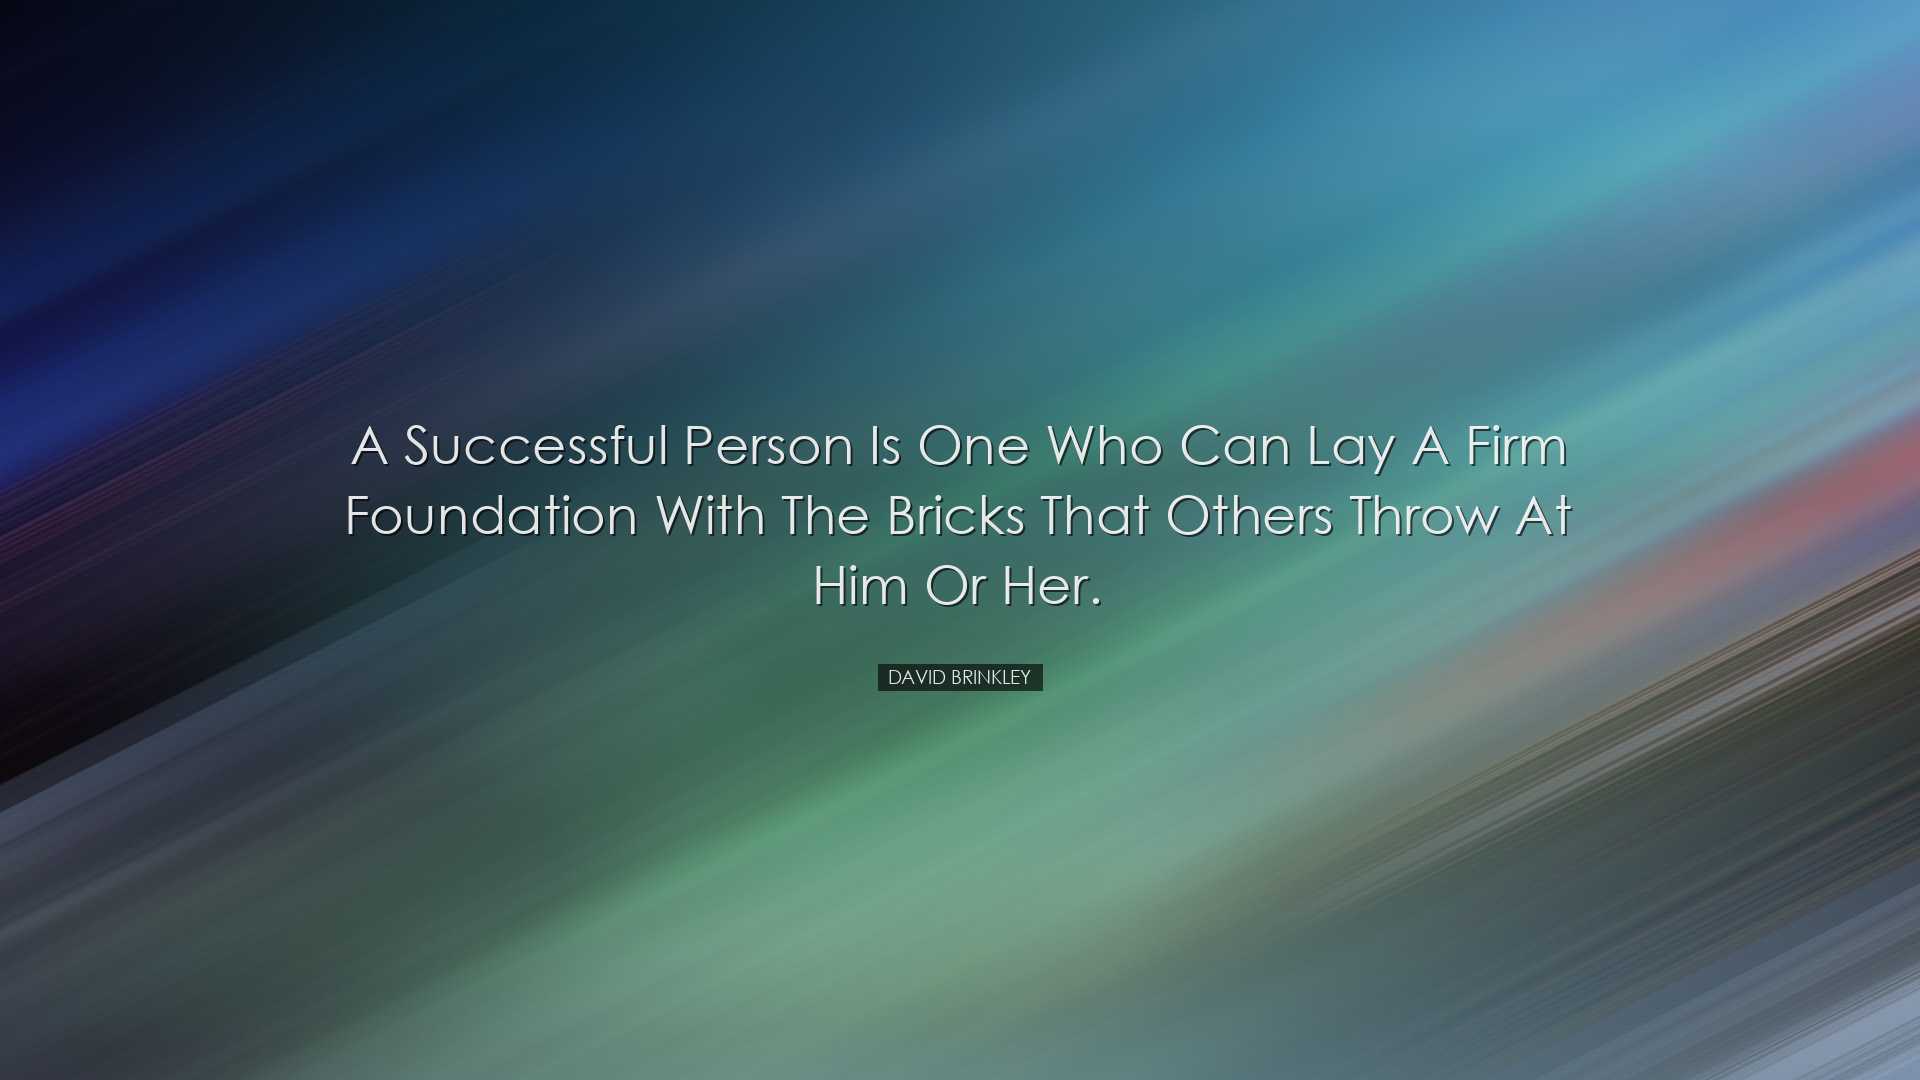 A successful person is one who can lay a firm foundation with the